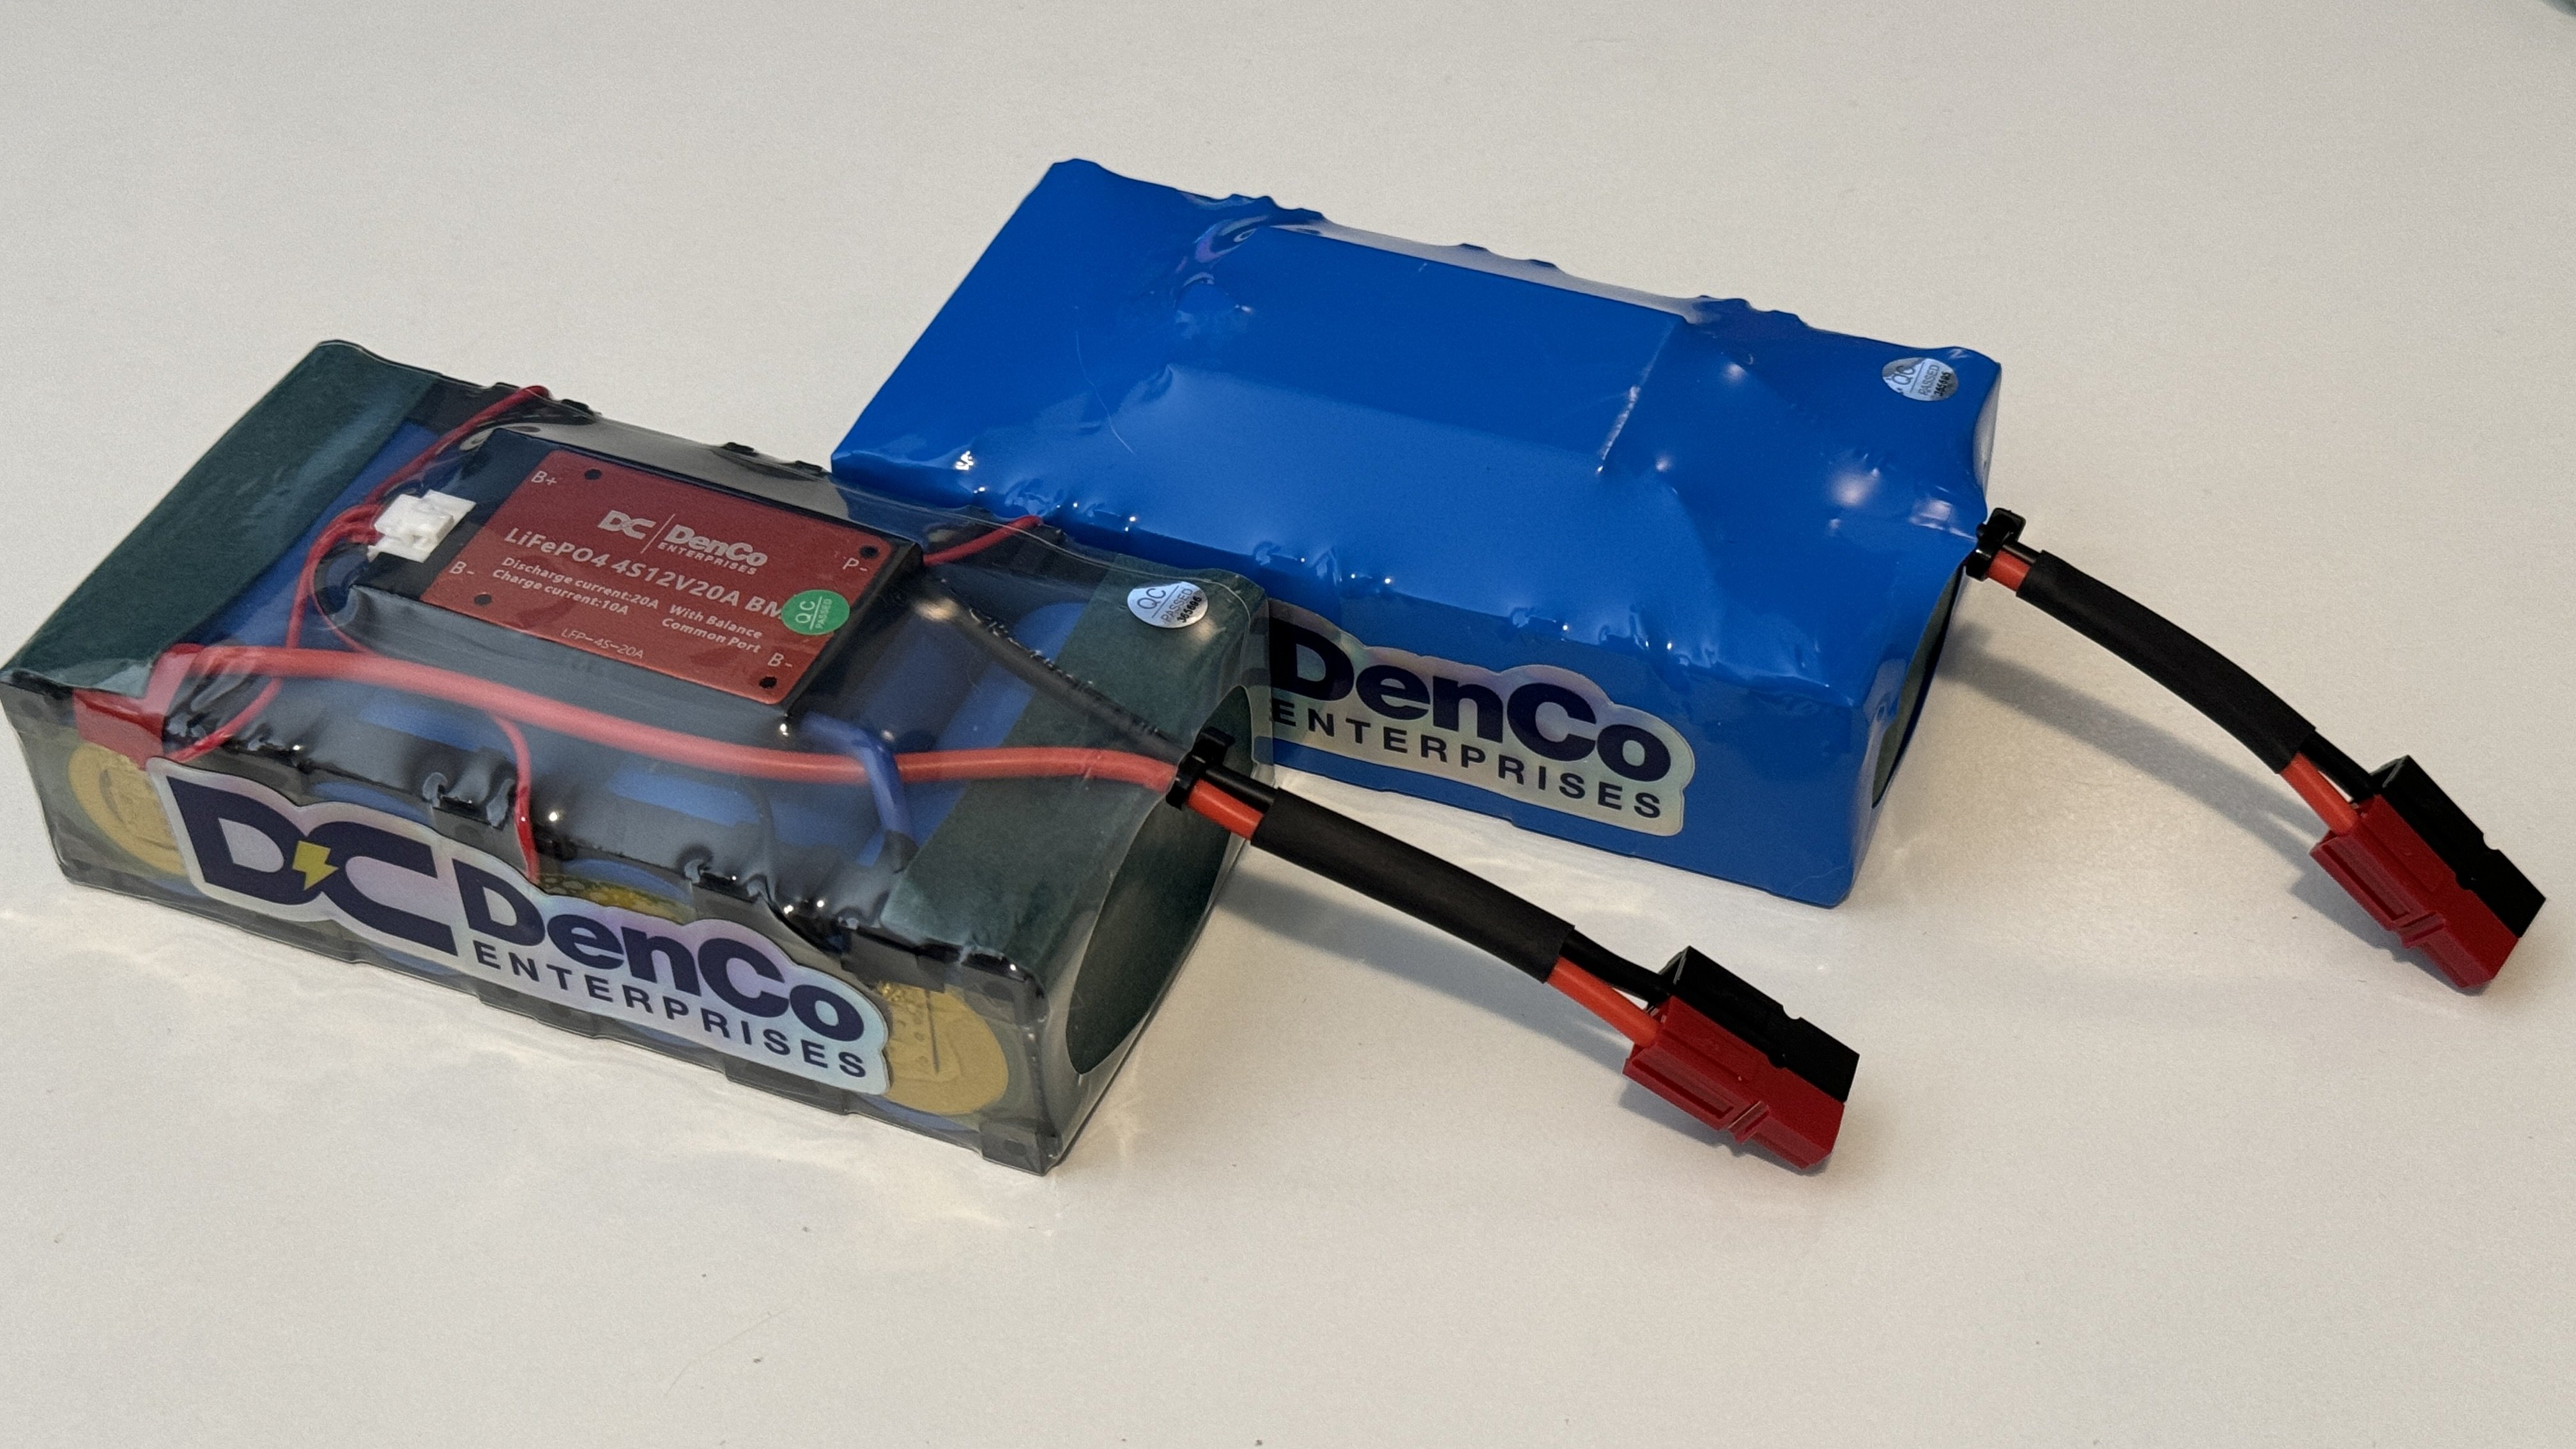 A clear-wrapped DenCo battery build dubbed 'Demonstrator Edition' alongside a standard blue-wrapped battery 5.5Ah battery build